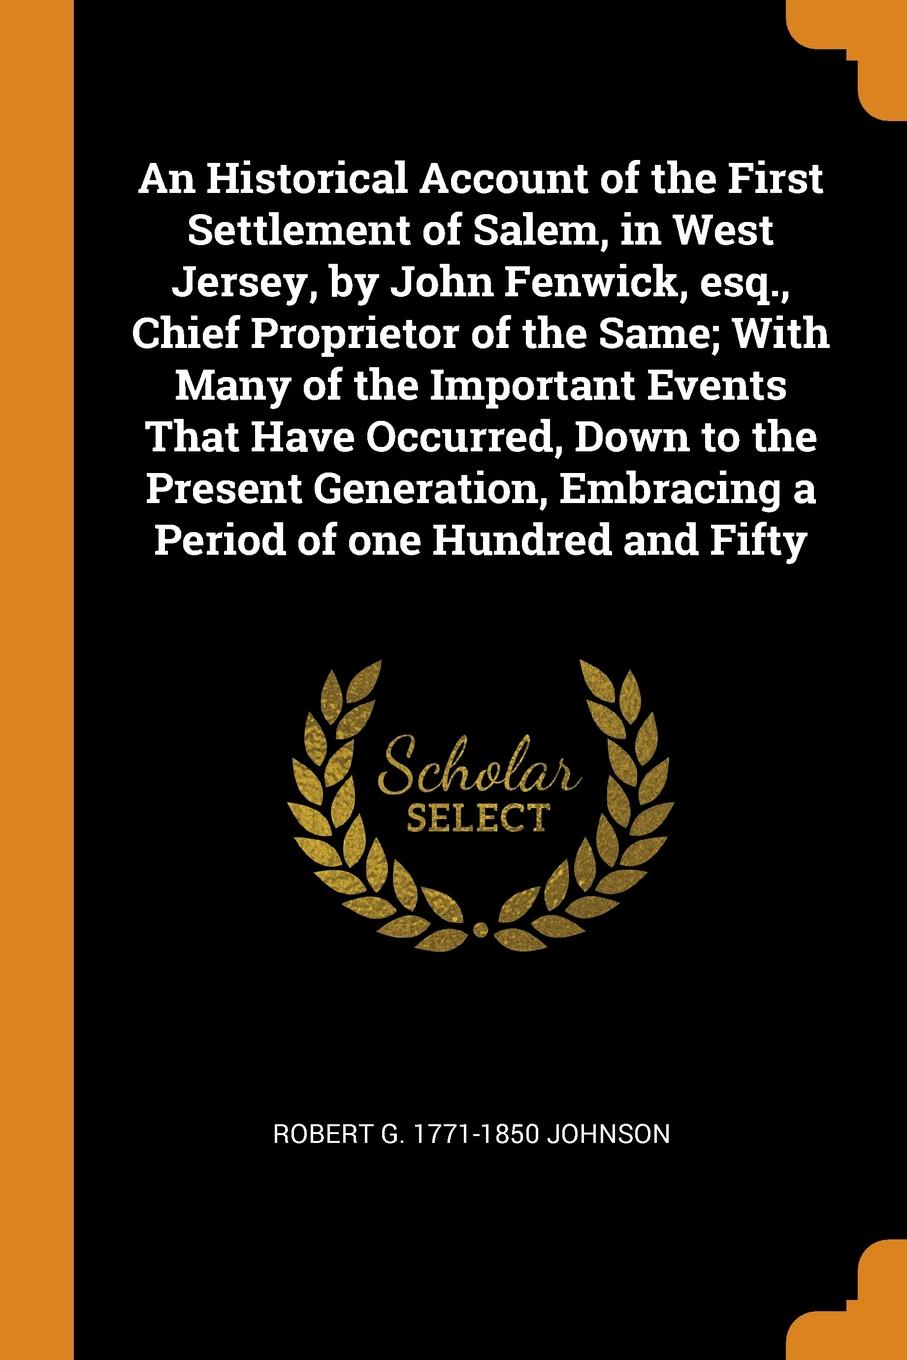 An Historical Account of the First Settlement of Salem, in West Jersey, by John Fenwick, esq., Chief Proprietor of the Same; With Many of the Important Events That Have Occurred, Down to the Present Generation, Embracing a Period of one Hundred an...